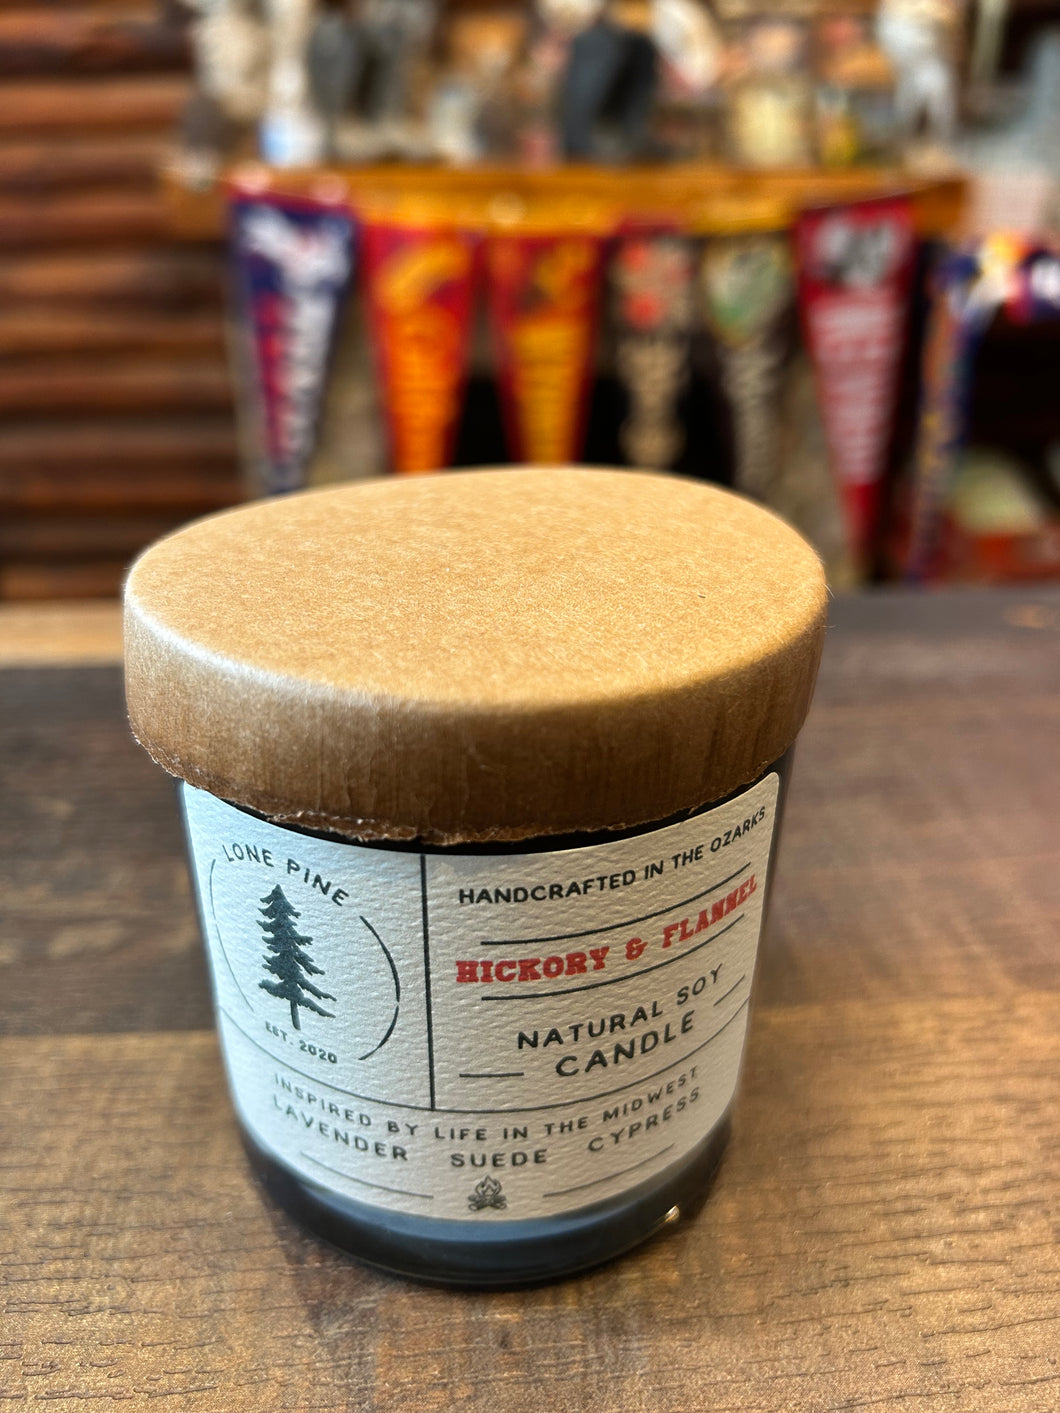 American Heritage Hickory & Flannel